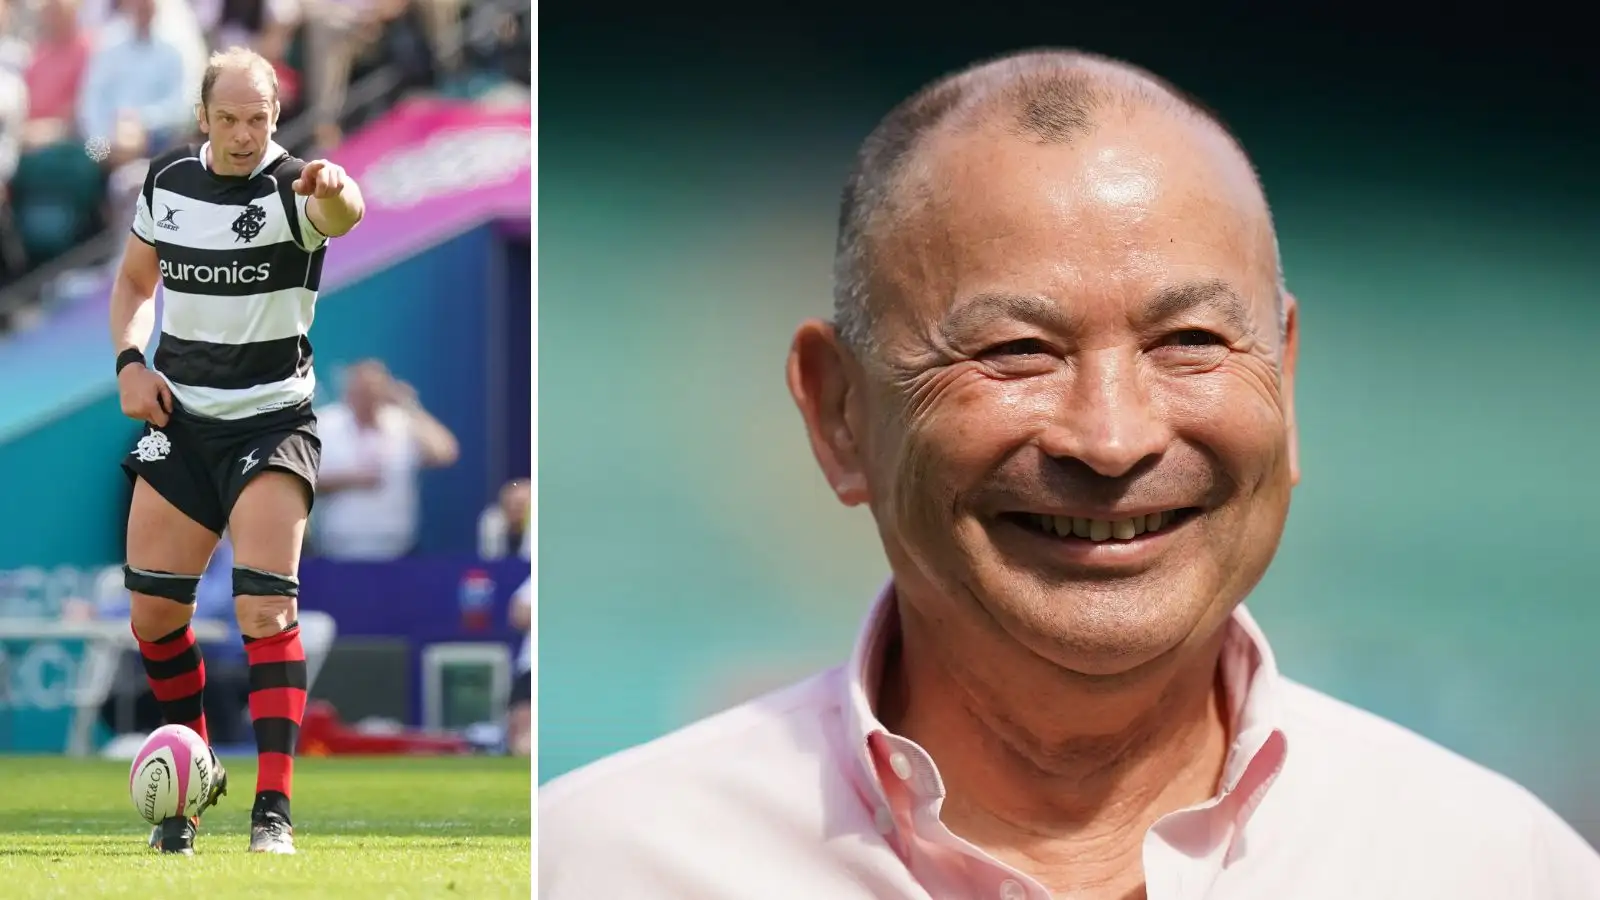 Eddie Jones joked that Alun Wyn Jones wouldn't be coming out of retirement to be a goal kicker after his missed attempts for the Baabaas against World XV.